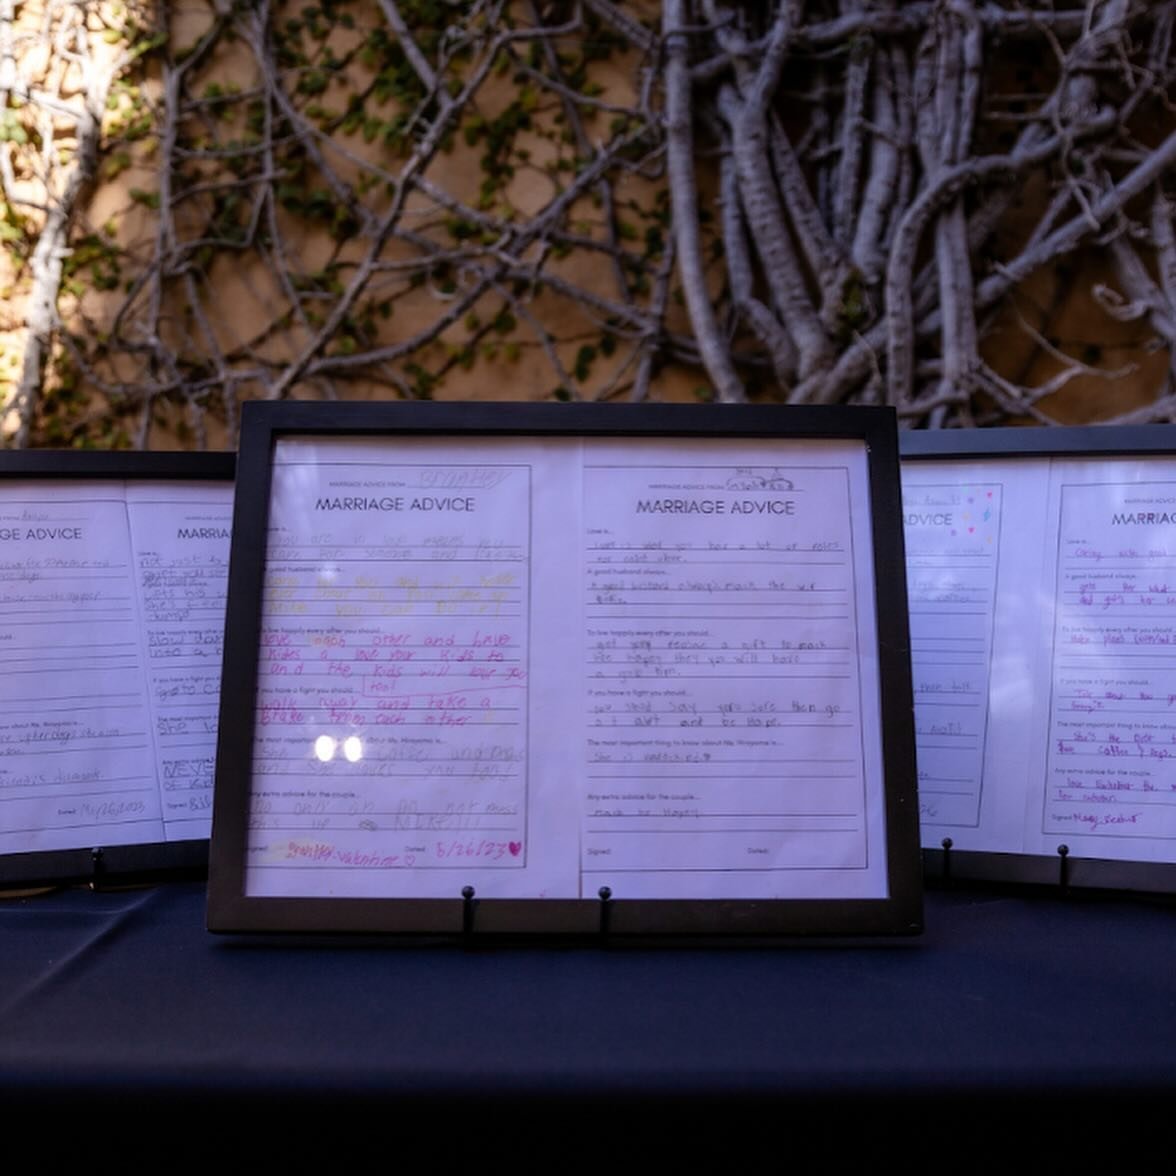 &ldquo;They&rsquo;re just frames, no big deal&rdquo; Maybe! But just frames can hold some of the most precious details of your day 🖼️

This wedding couple rented our &ldquo;Black 8x11 Frames&rdquo; to frame notes from a teacher&rsquo;s 5th grade cla